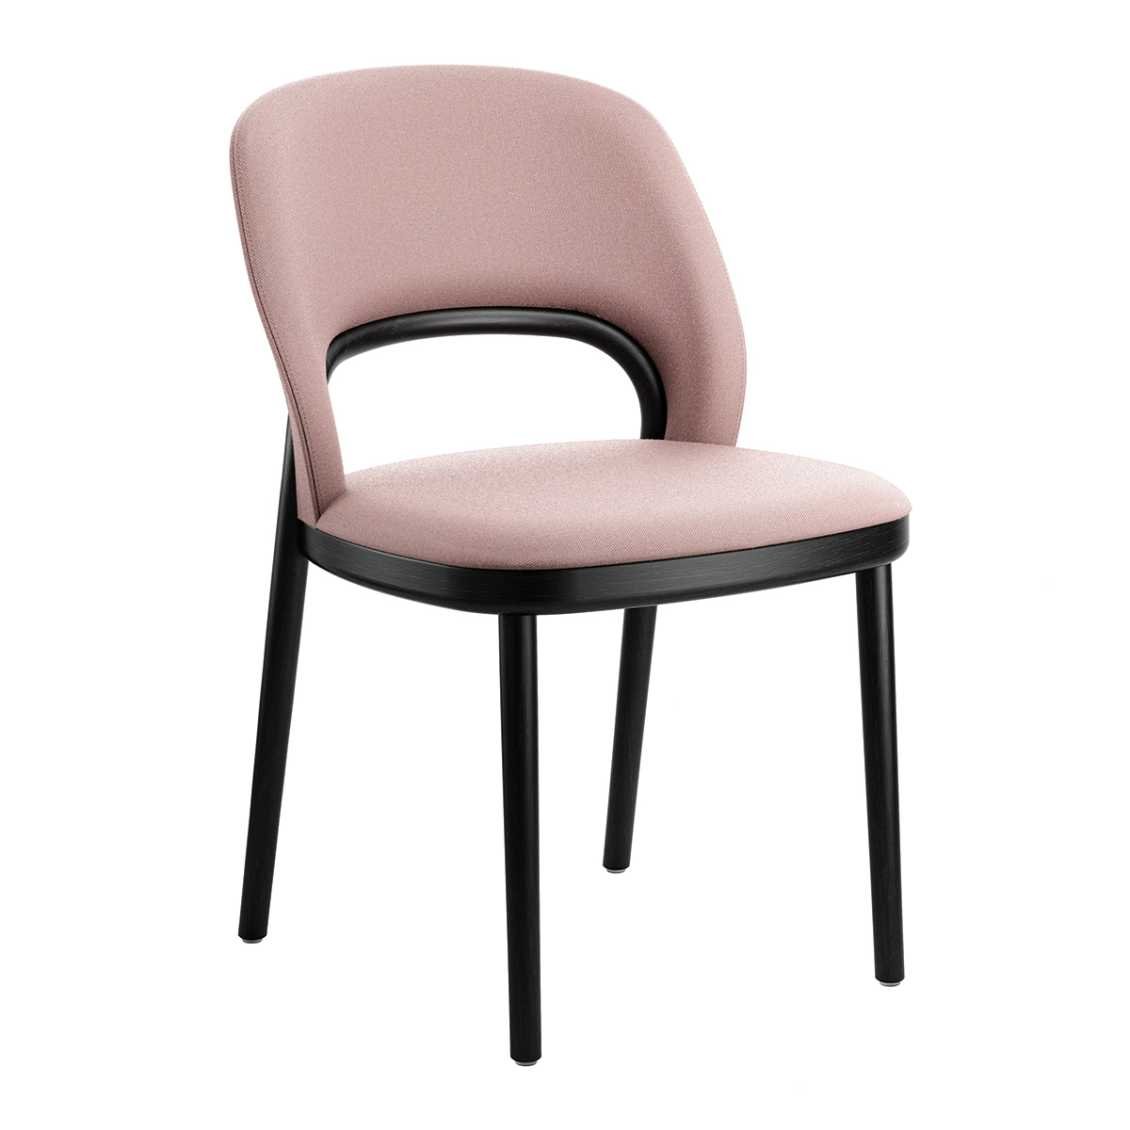 Thonet 520 P dining chair